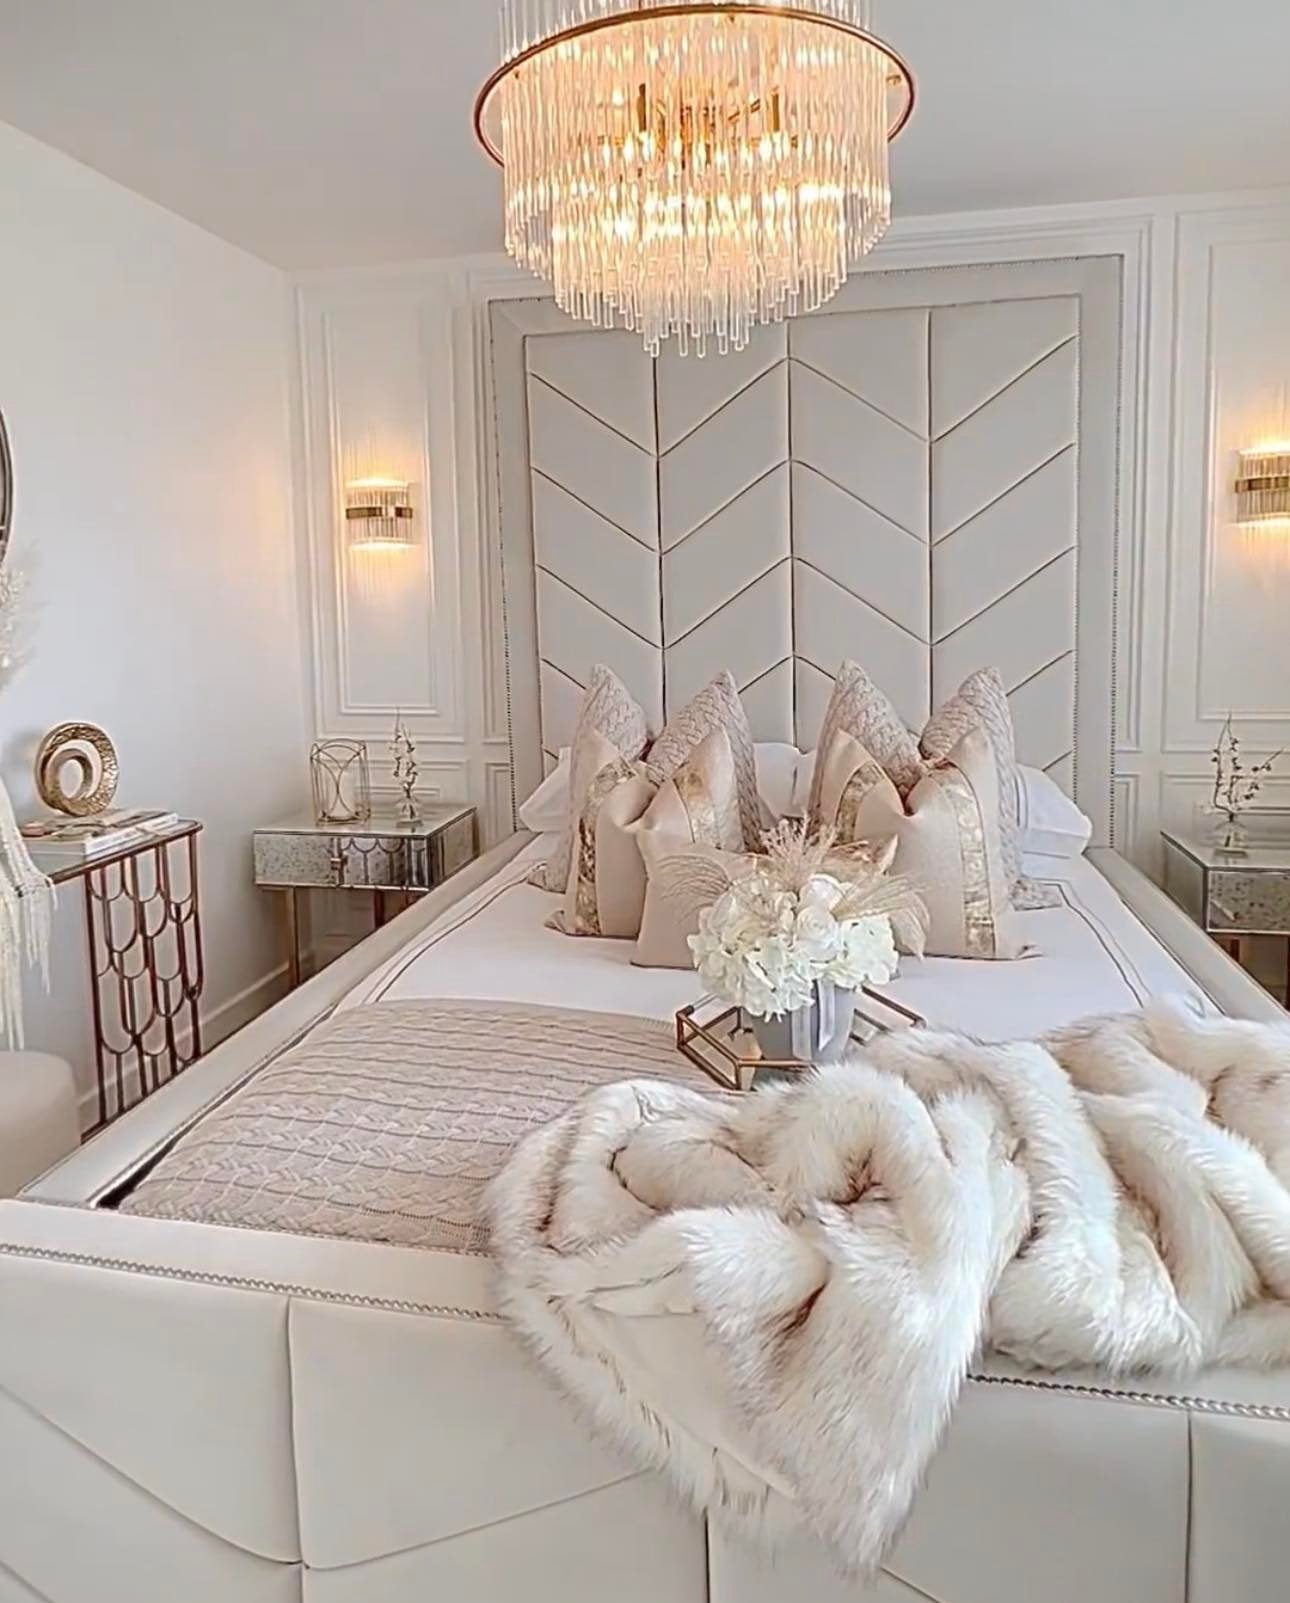 The Bespoke Madrid Bed